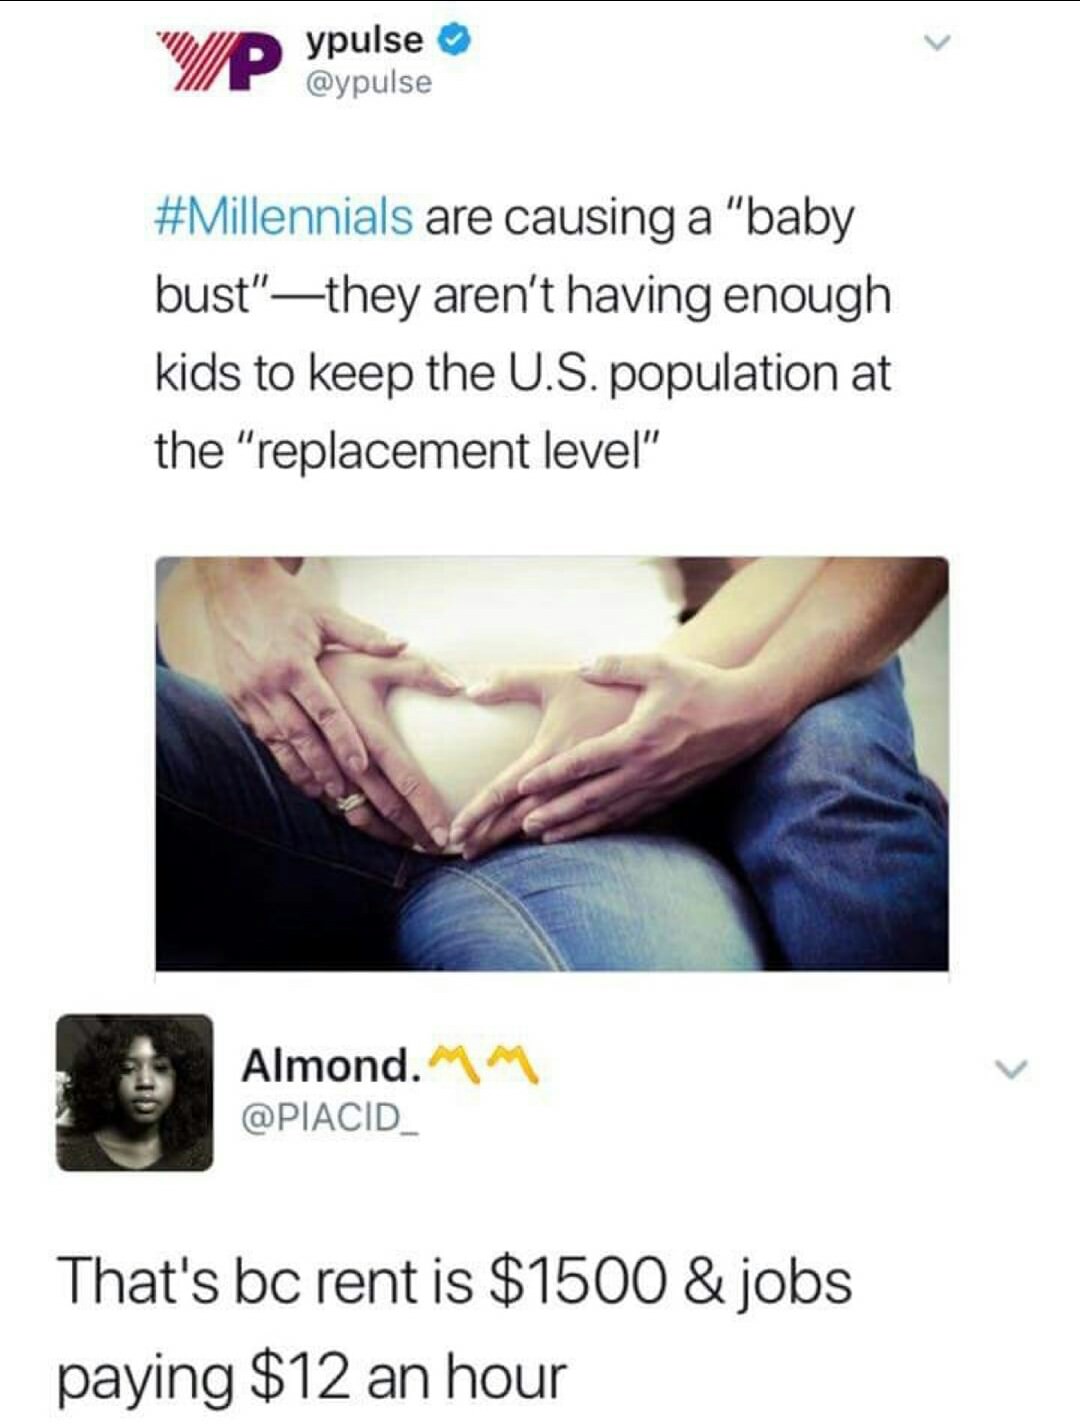 millennials aren t having kids - ypulse are causing a "baby bust"they aren't having enough kids to keep the U.S. population at the "replacement level" Almond.Mm That's bc rent is $1500 & jobs paying $12 an hour